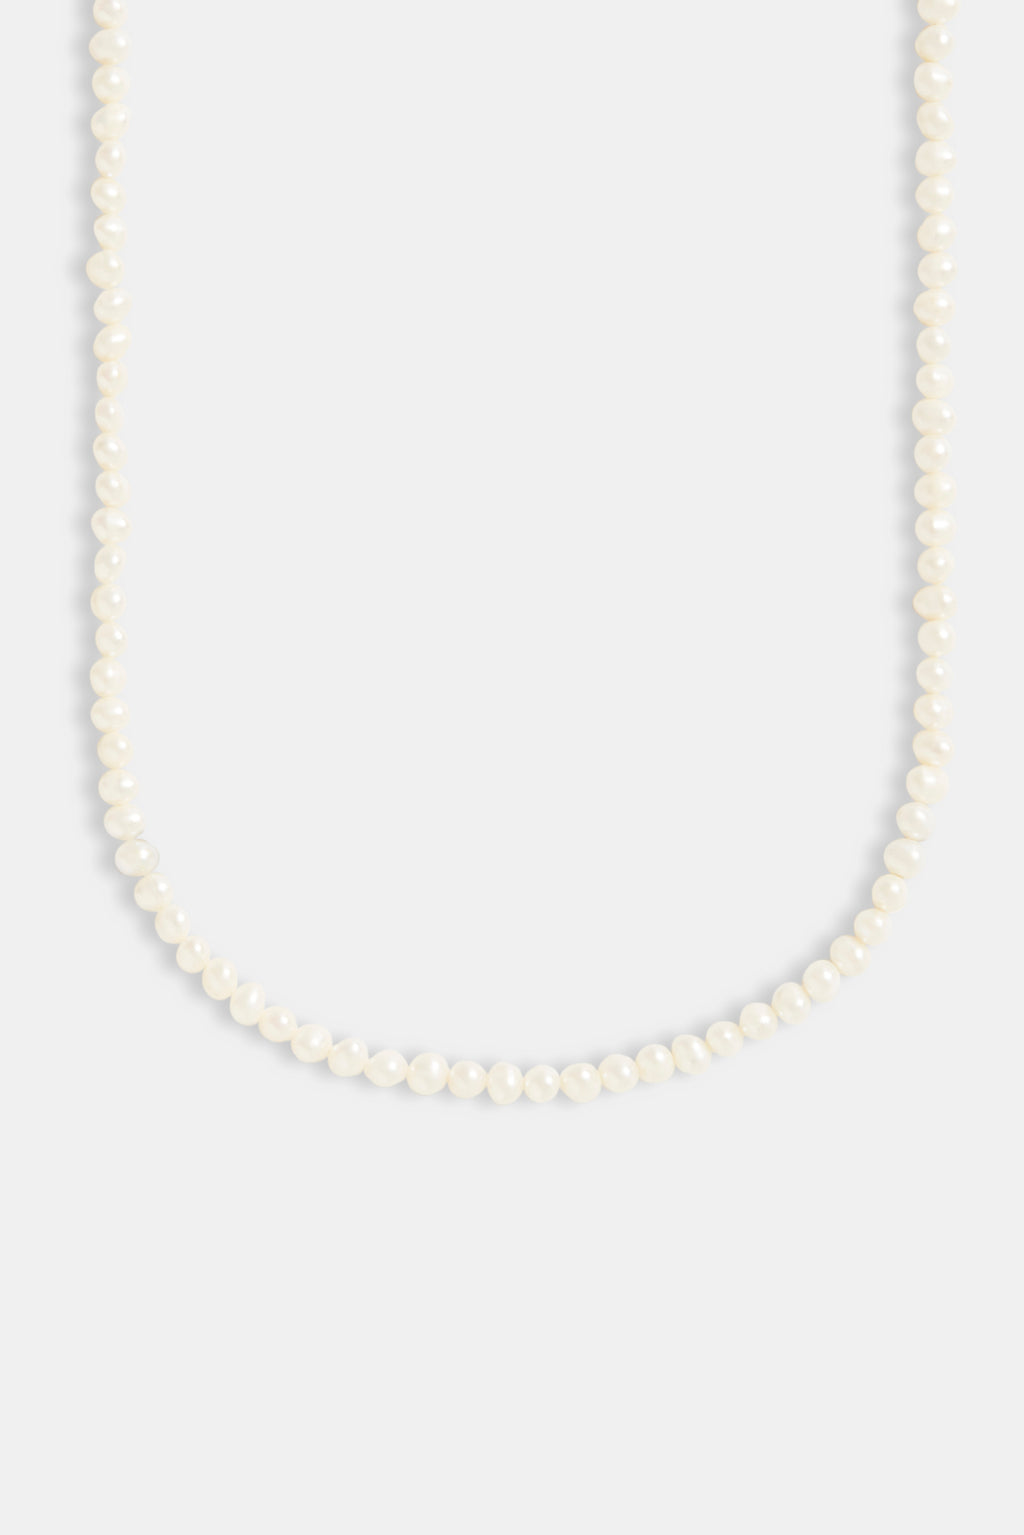 Top 5 Simple Pearl Pendants for Everyday Wear | With Clarity